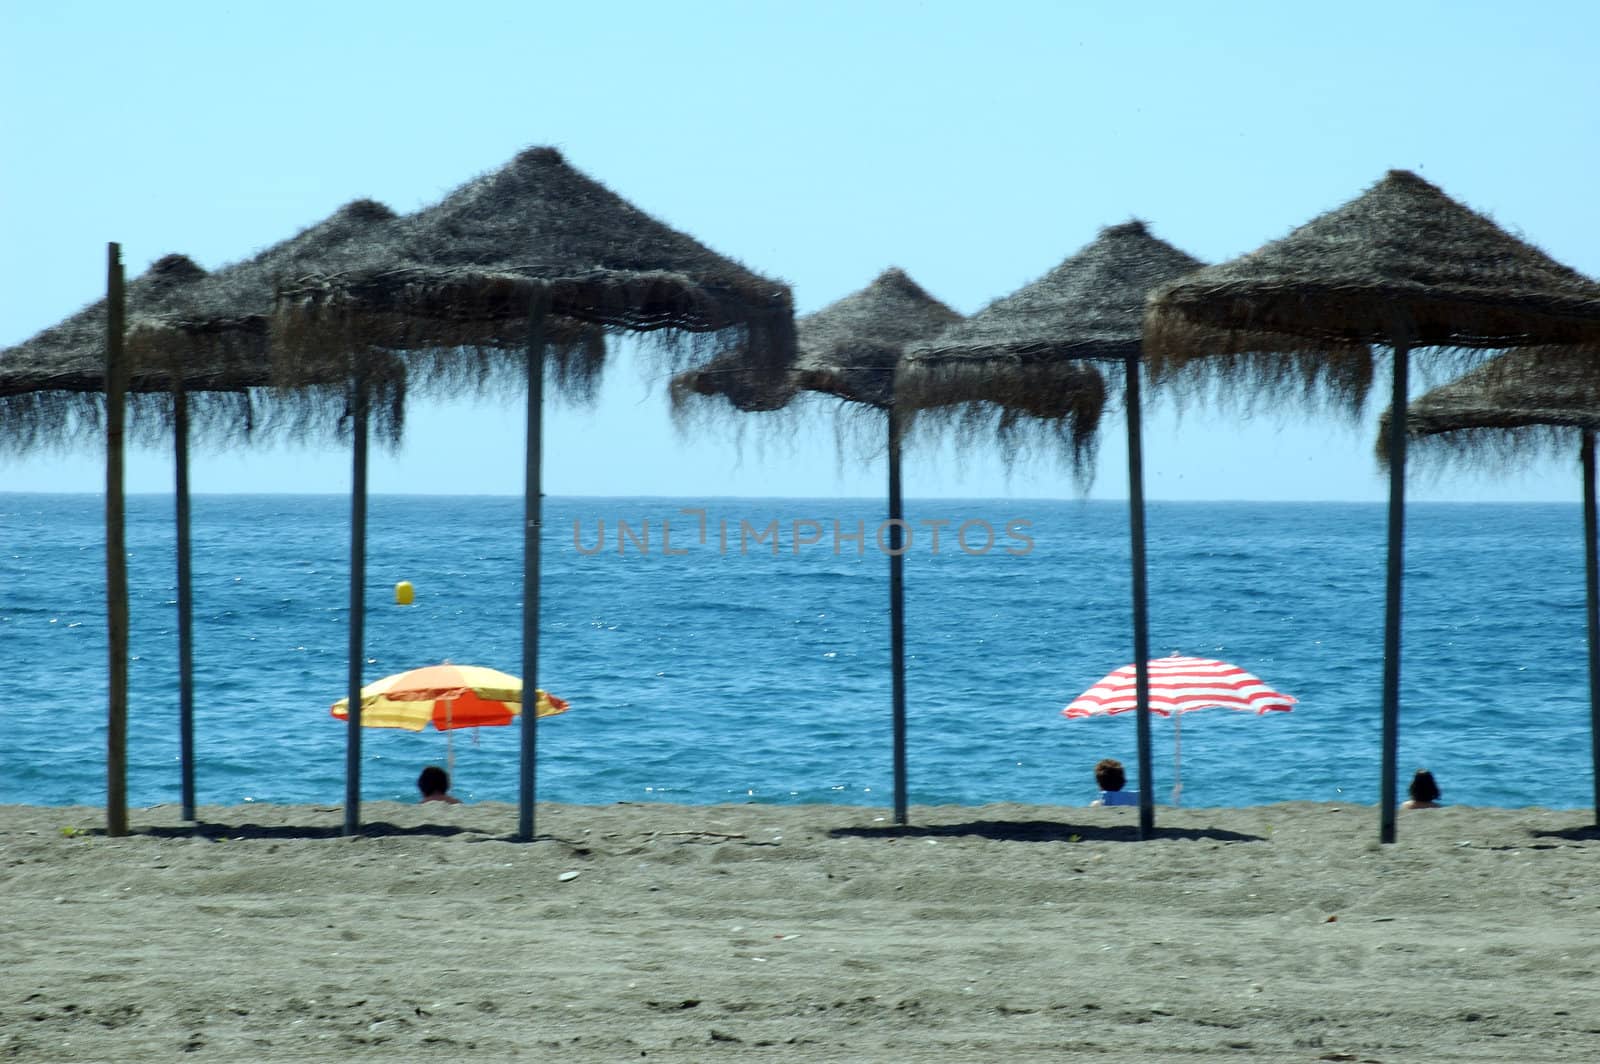 Beach with umbrellas in Andalusia, Spain